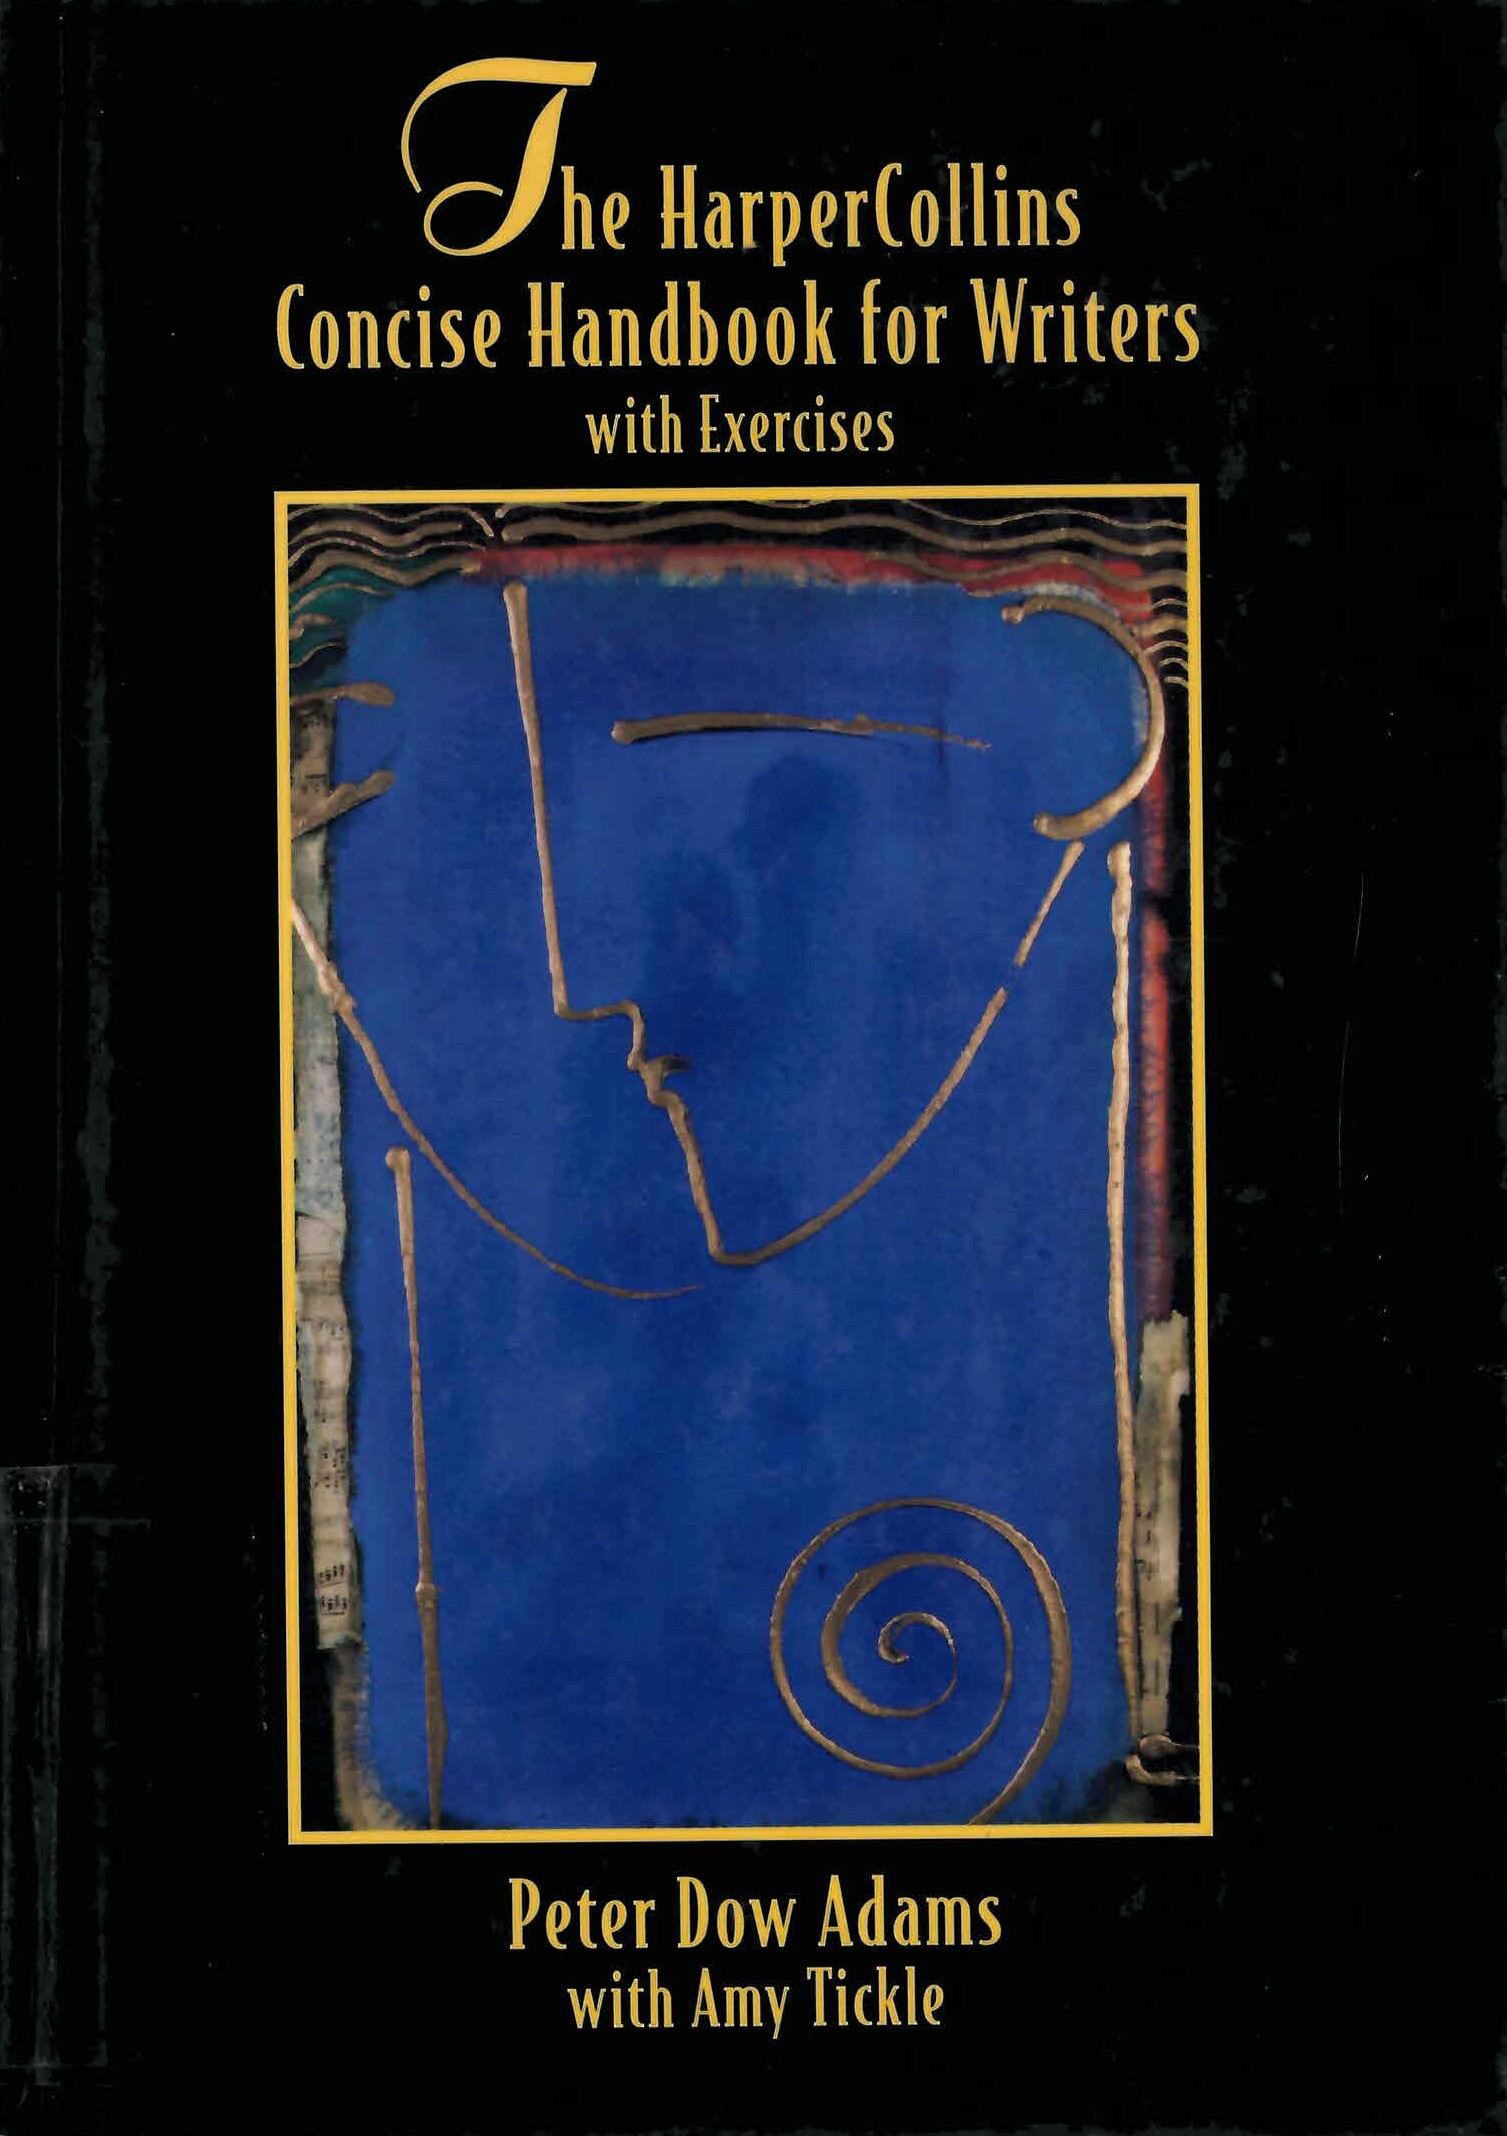 The HarperCollins concise handbook for writers